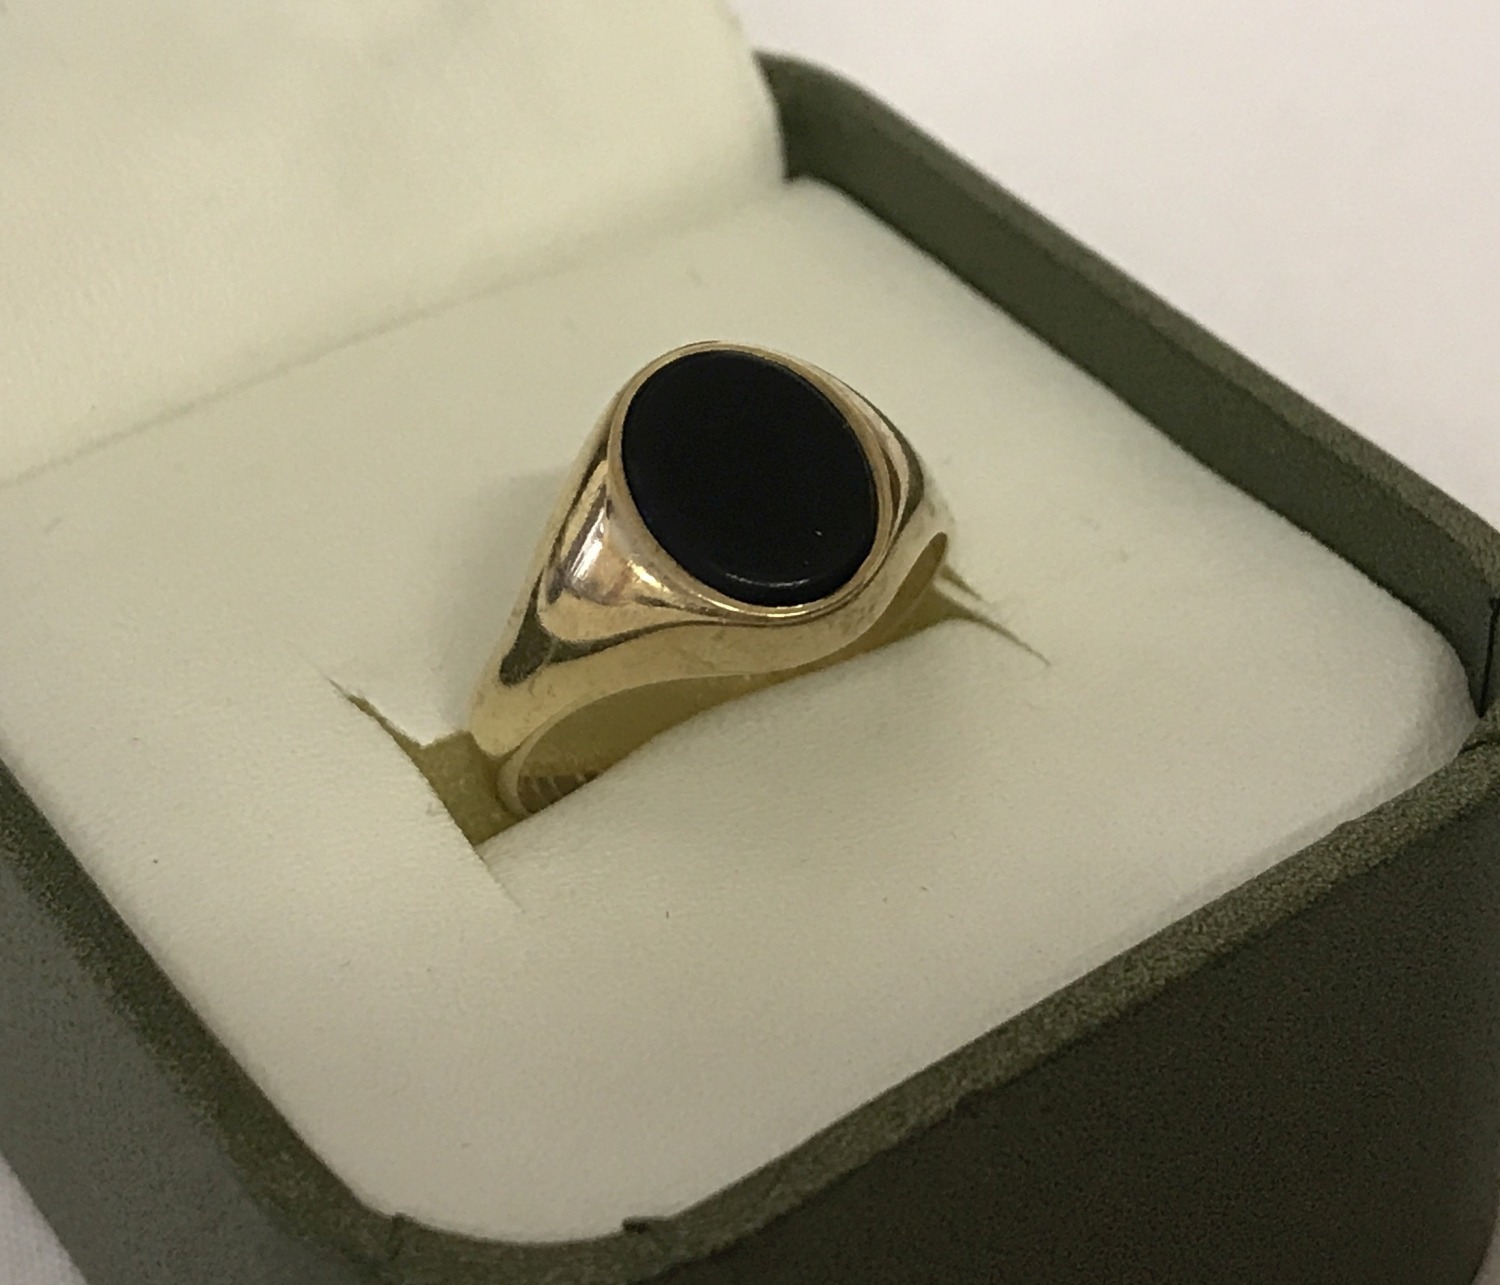 A 9ct gold signet ring set with an oval cut black onyx stone.